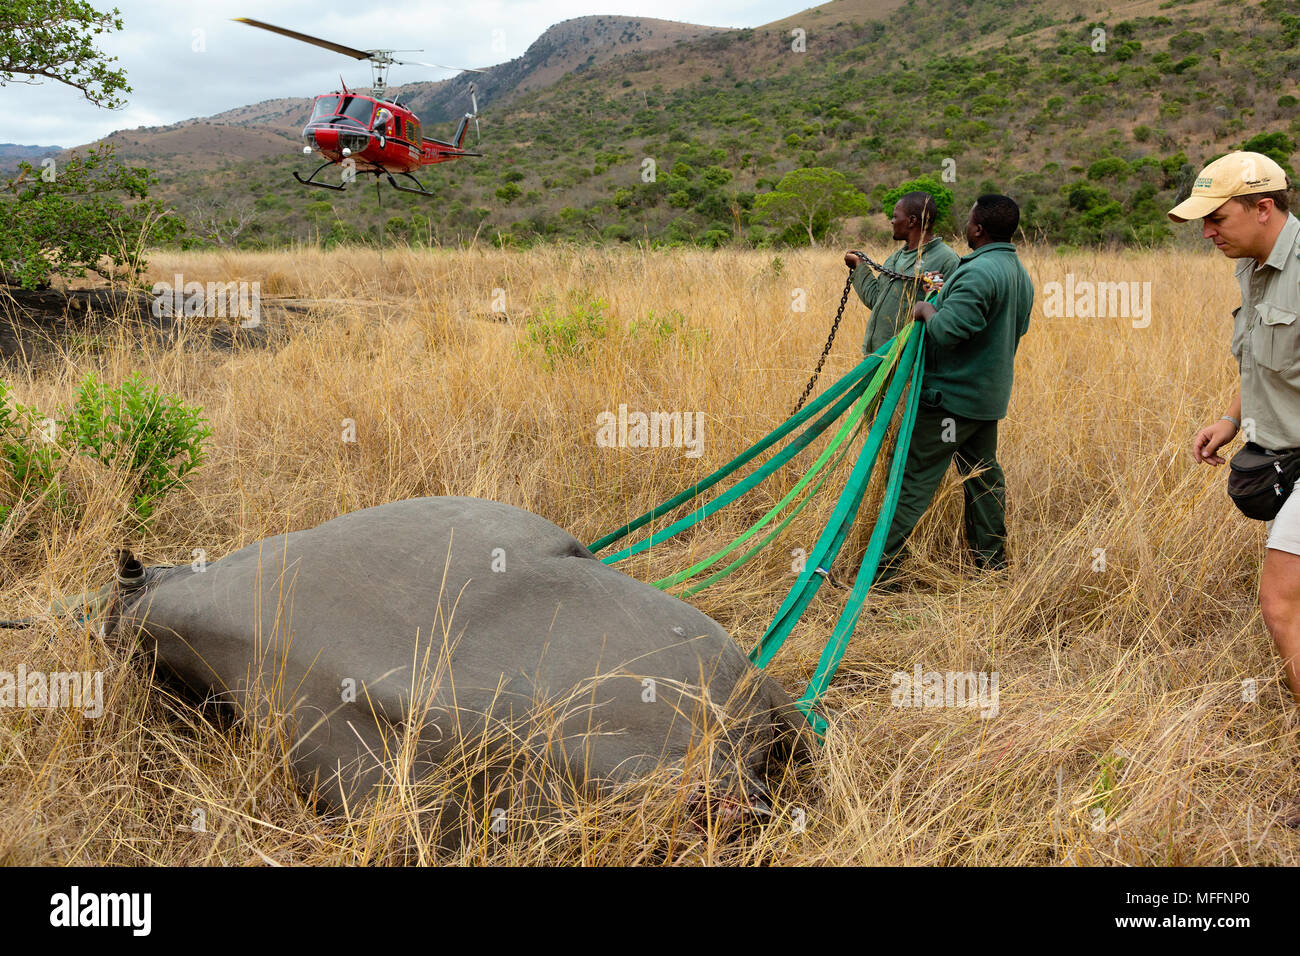 Black Rhinoceros  (Diceros bicornis) being prepared for airlift by helicopter.Ithala game reserve.Capture officer Jed Bird supervising the airlift.Sou Stock Photo